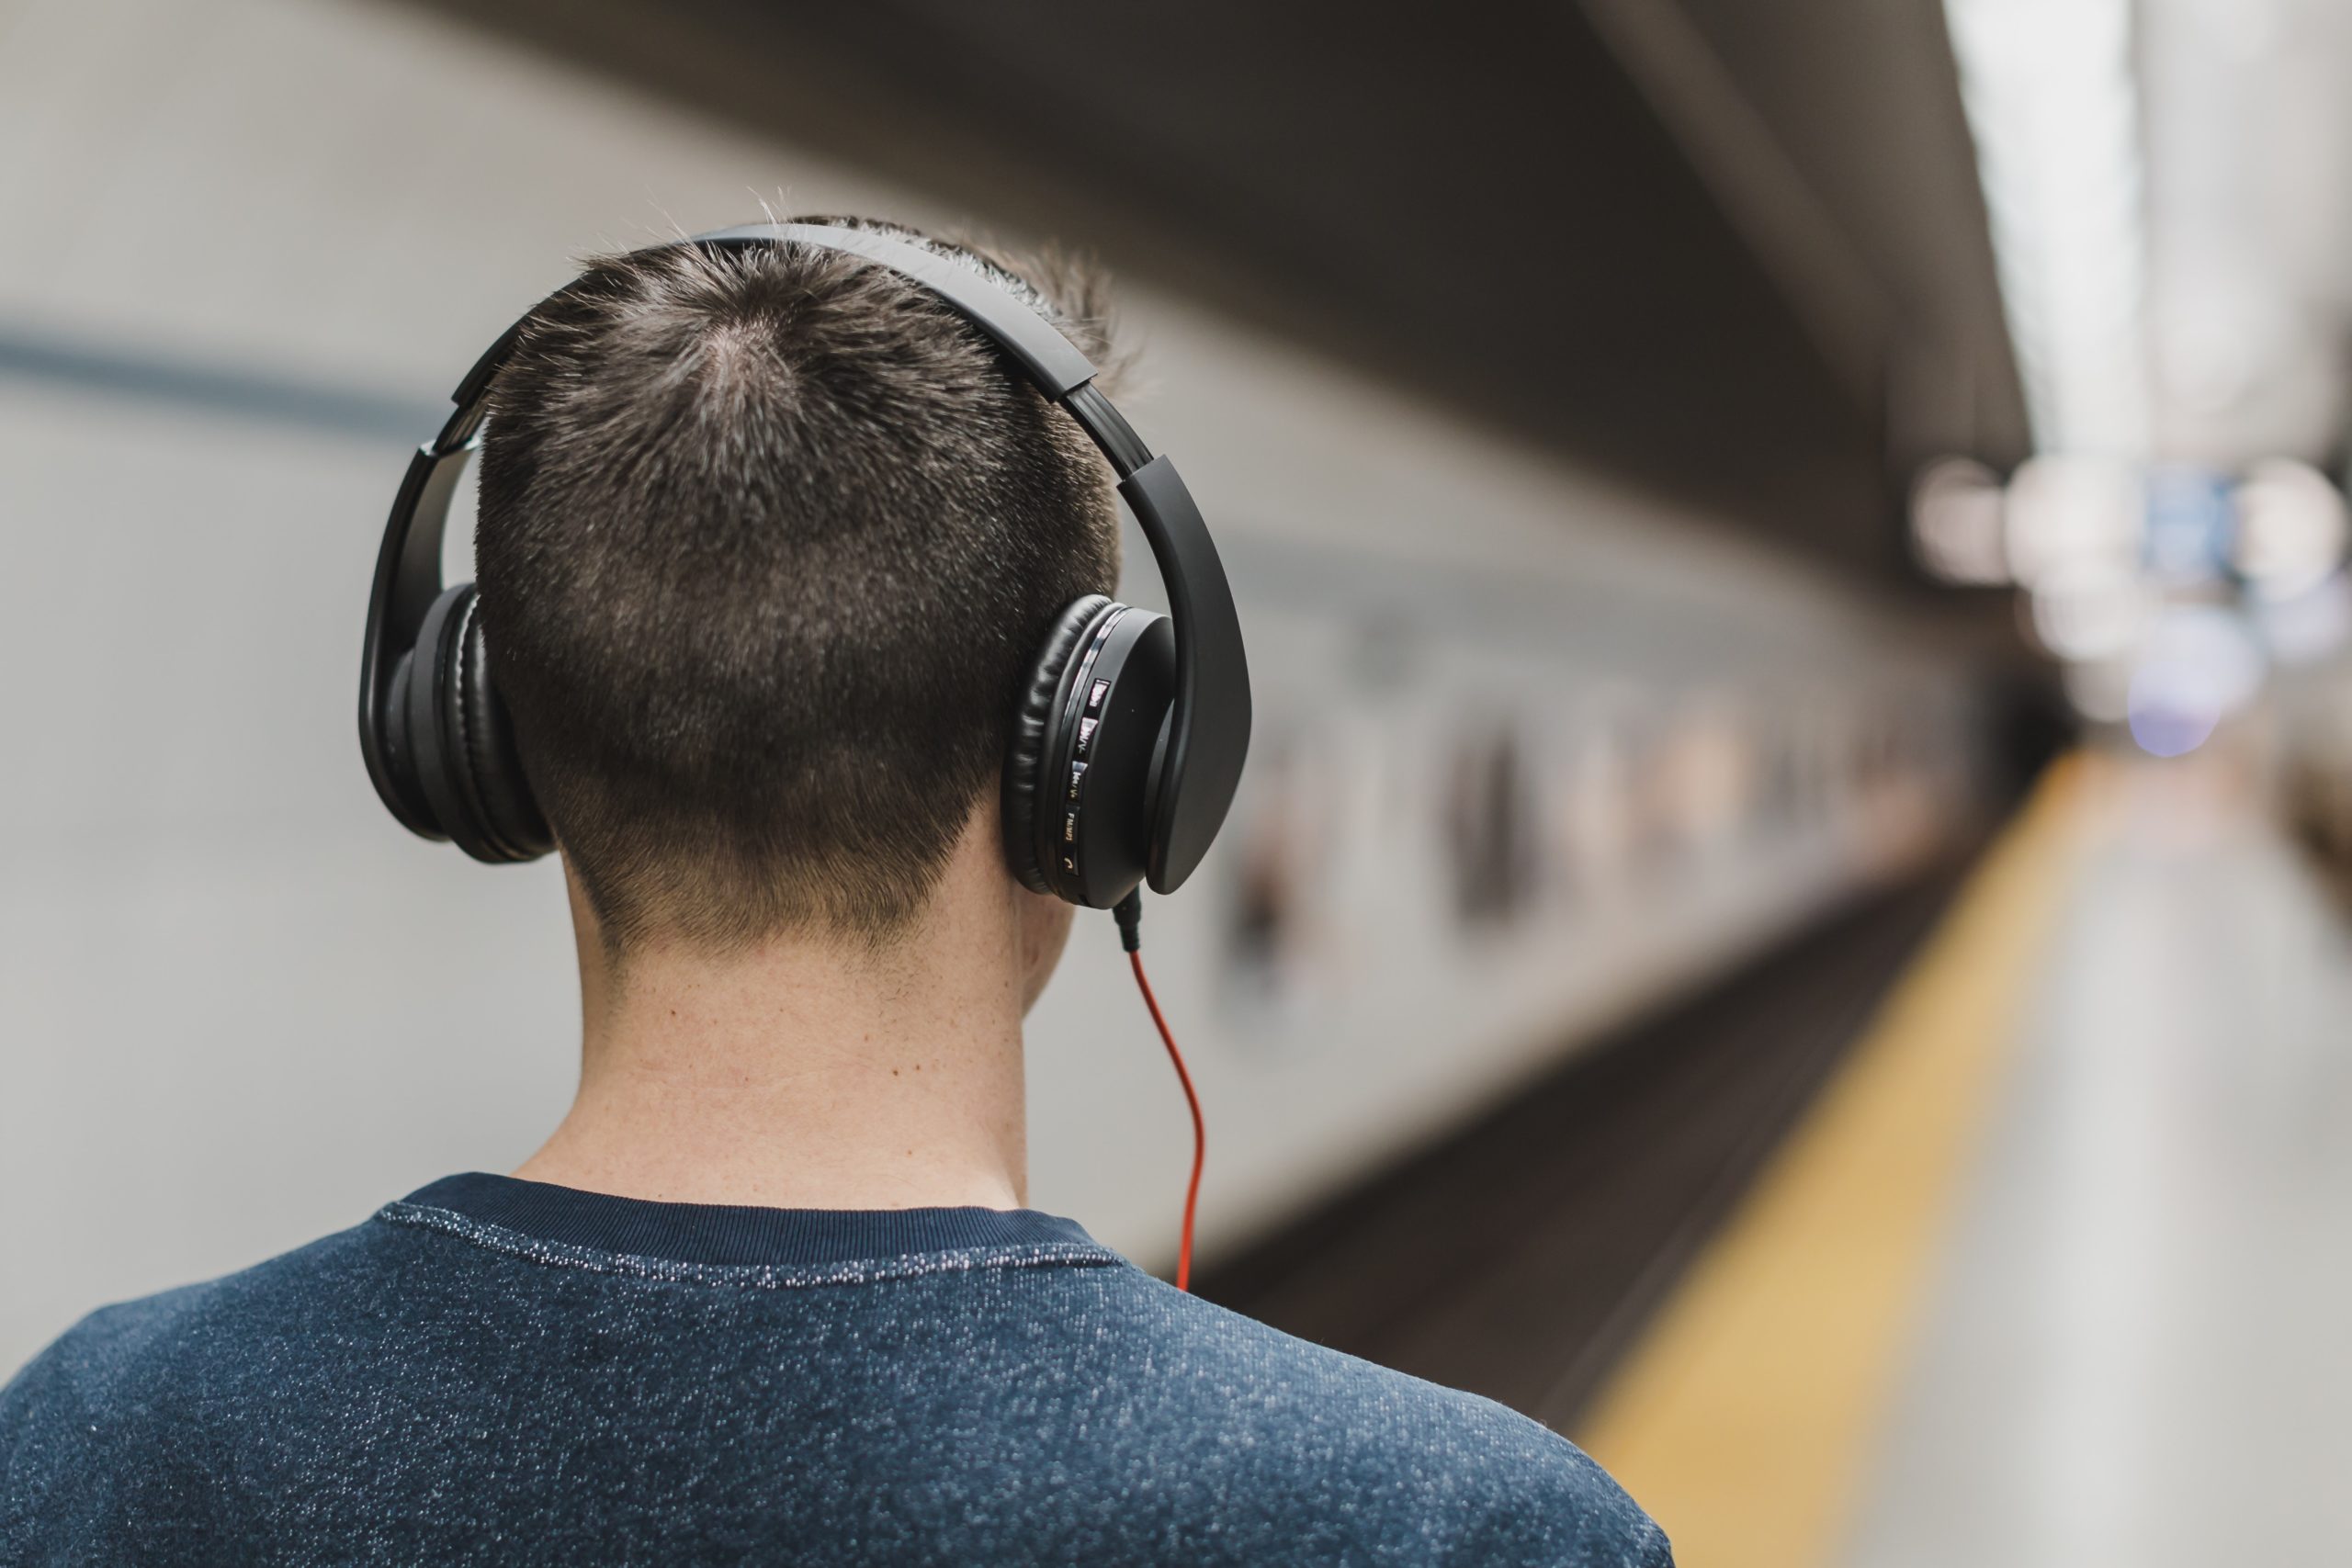 Man at tube station listening to music with headphones